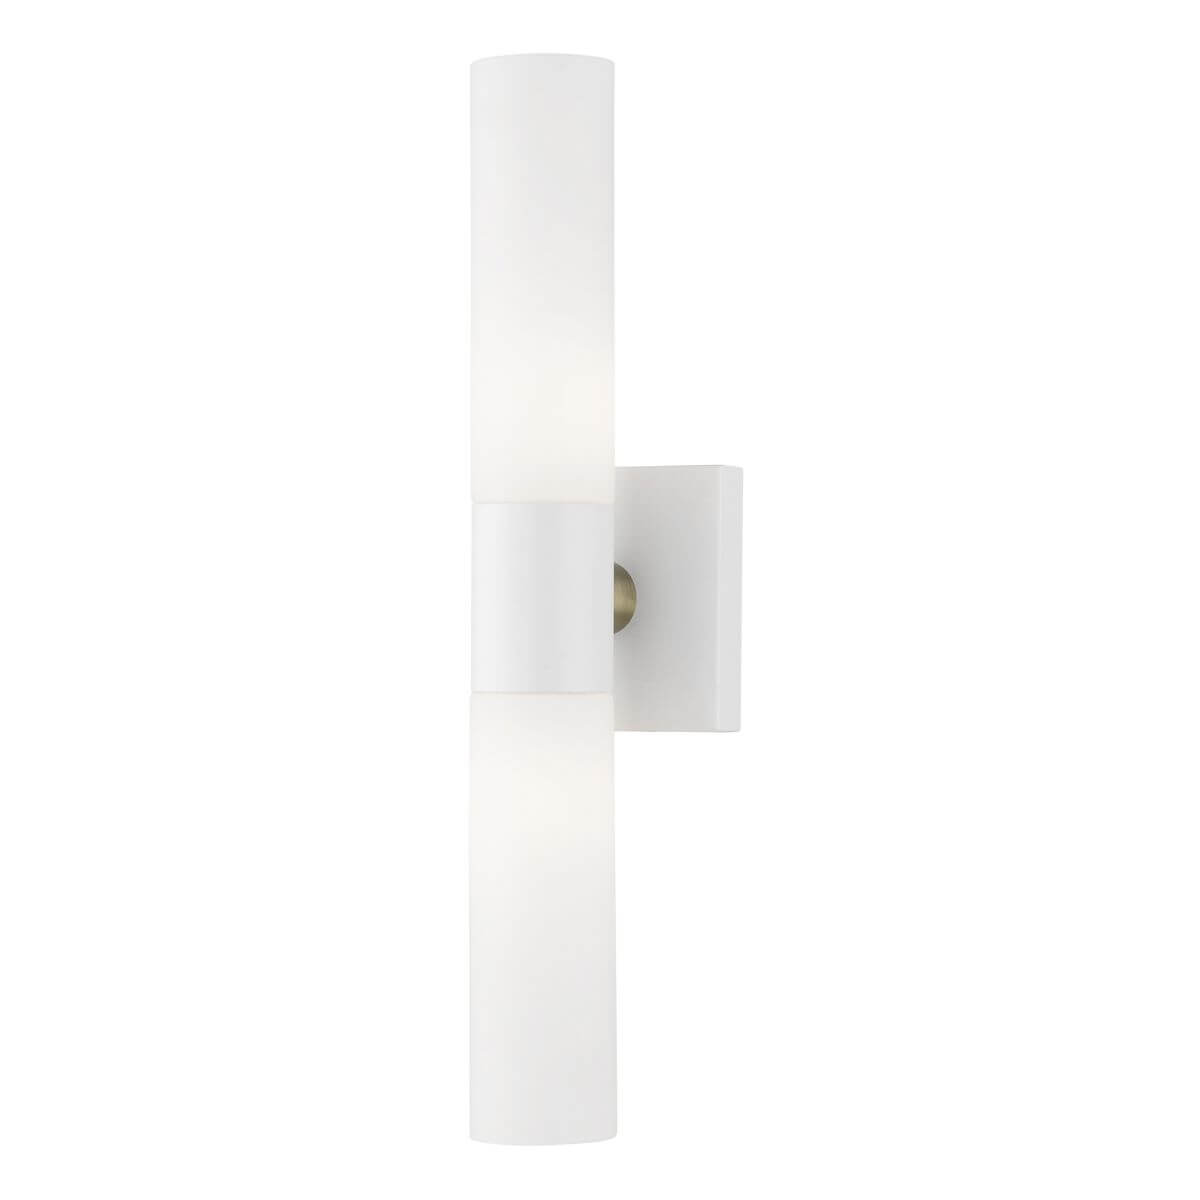 Livex 10102-13 Aero 2 Light 18 inch Vanity Sconce in Textured White-Brushed Nickel Accent with Hand Blown Satin Opal White Twist Lock Glass